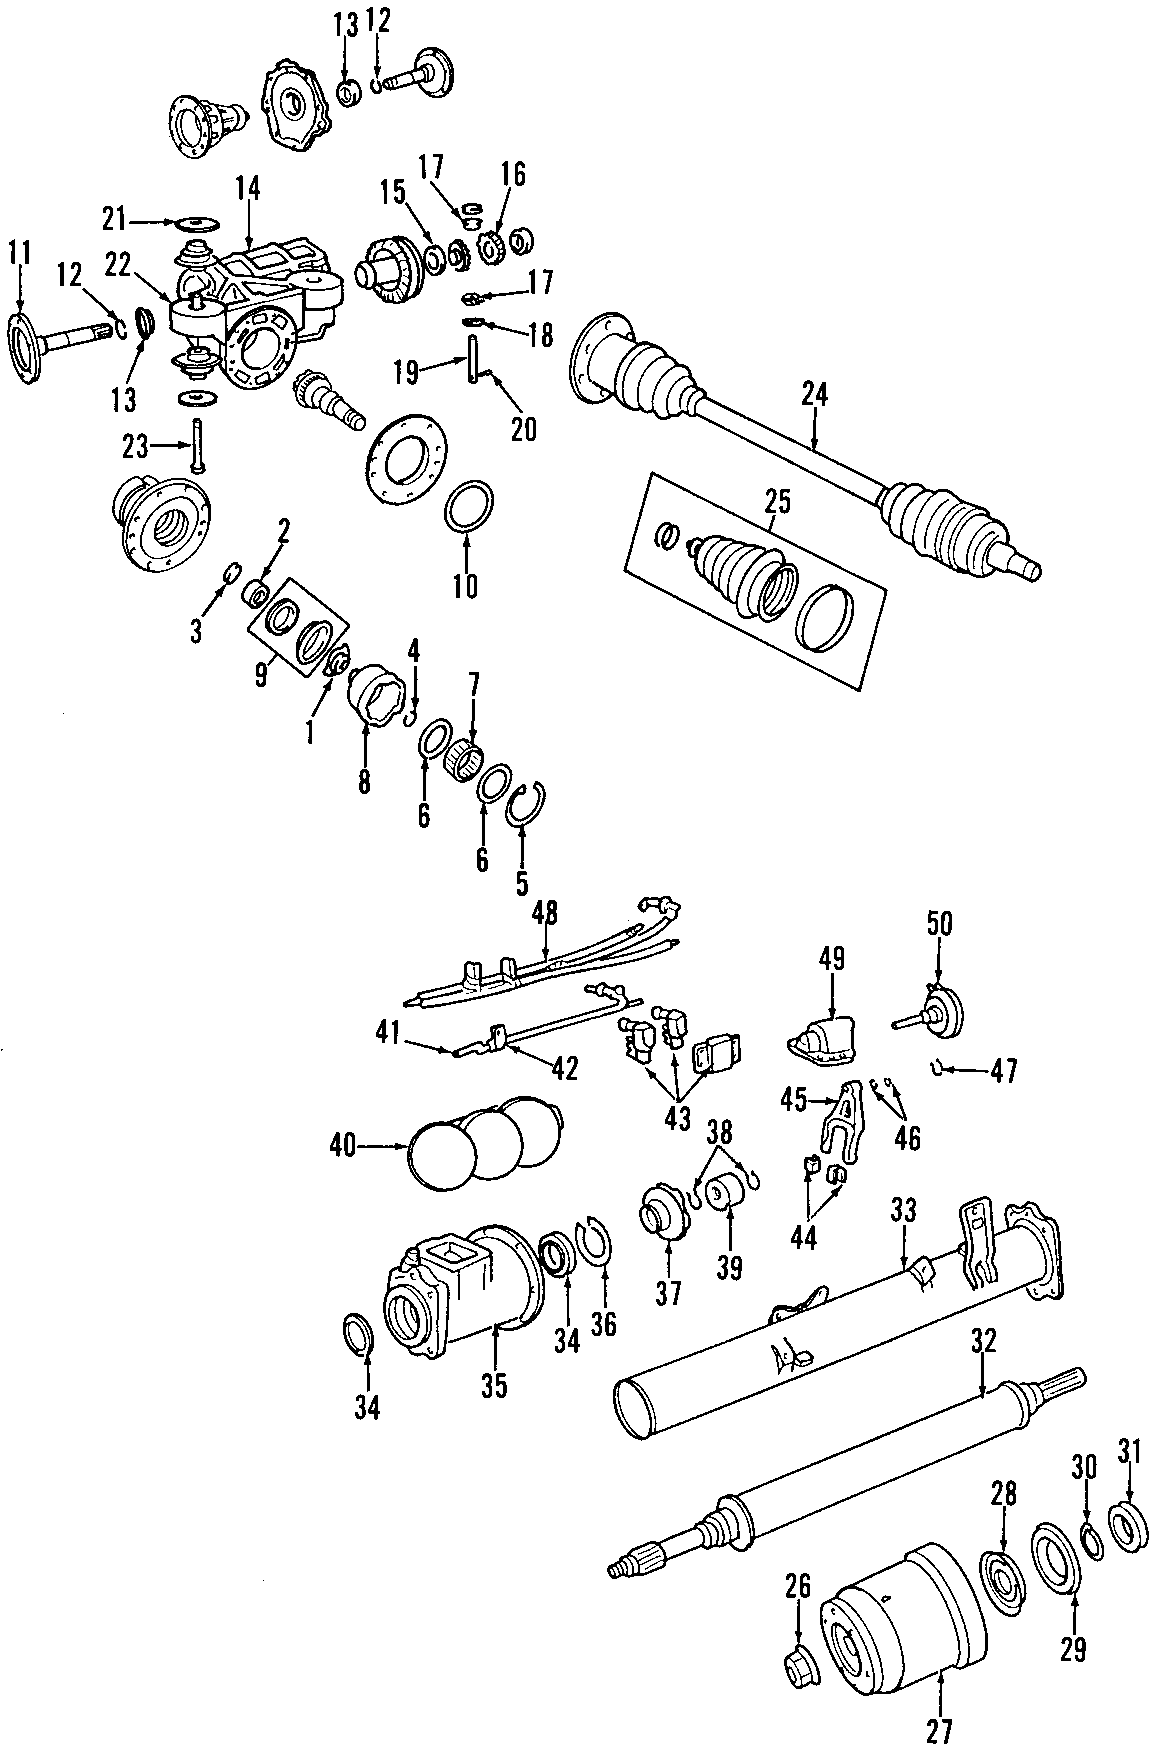 37DRIVE AXLES. REAR AXLE. AXLE SHAFTS & JOINTS. DIFFERENTIAL. PROPELLER SHAFT.https://images.simplepart.com/images/parts/motor/fullsize/T040085.png